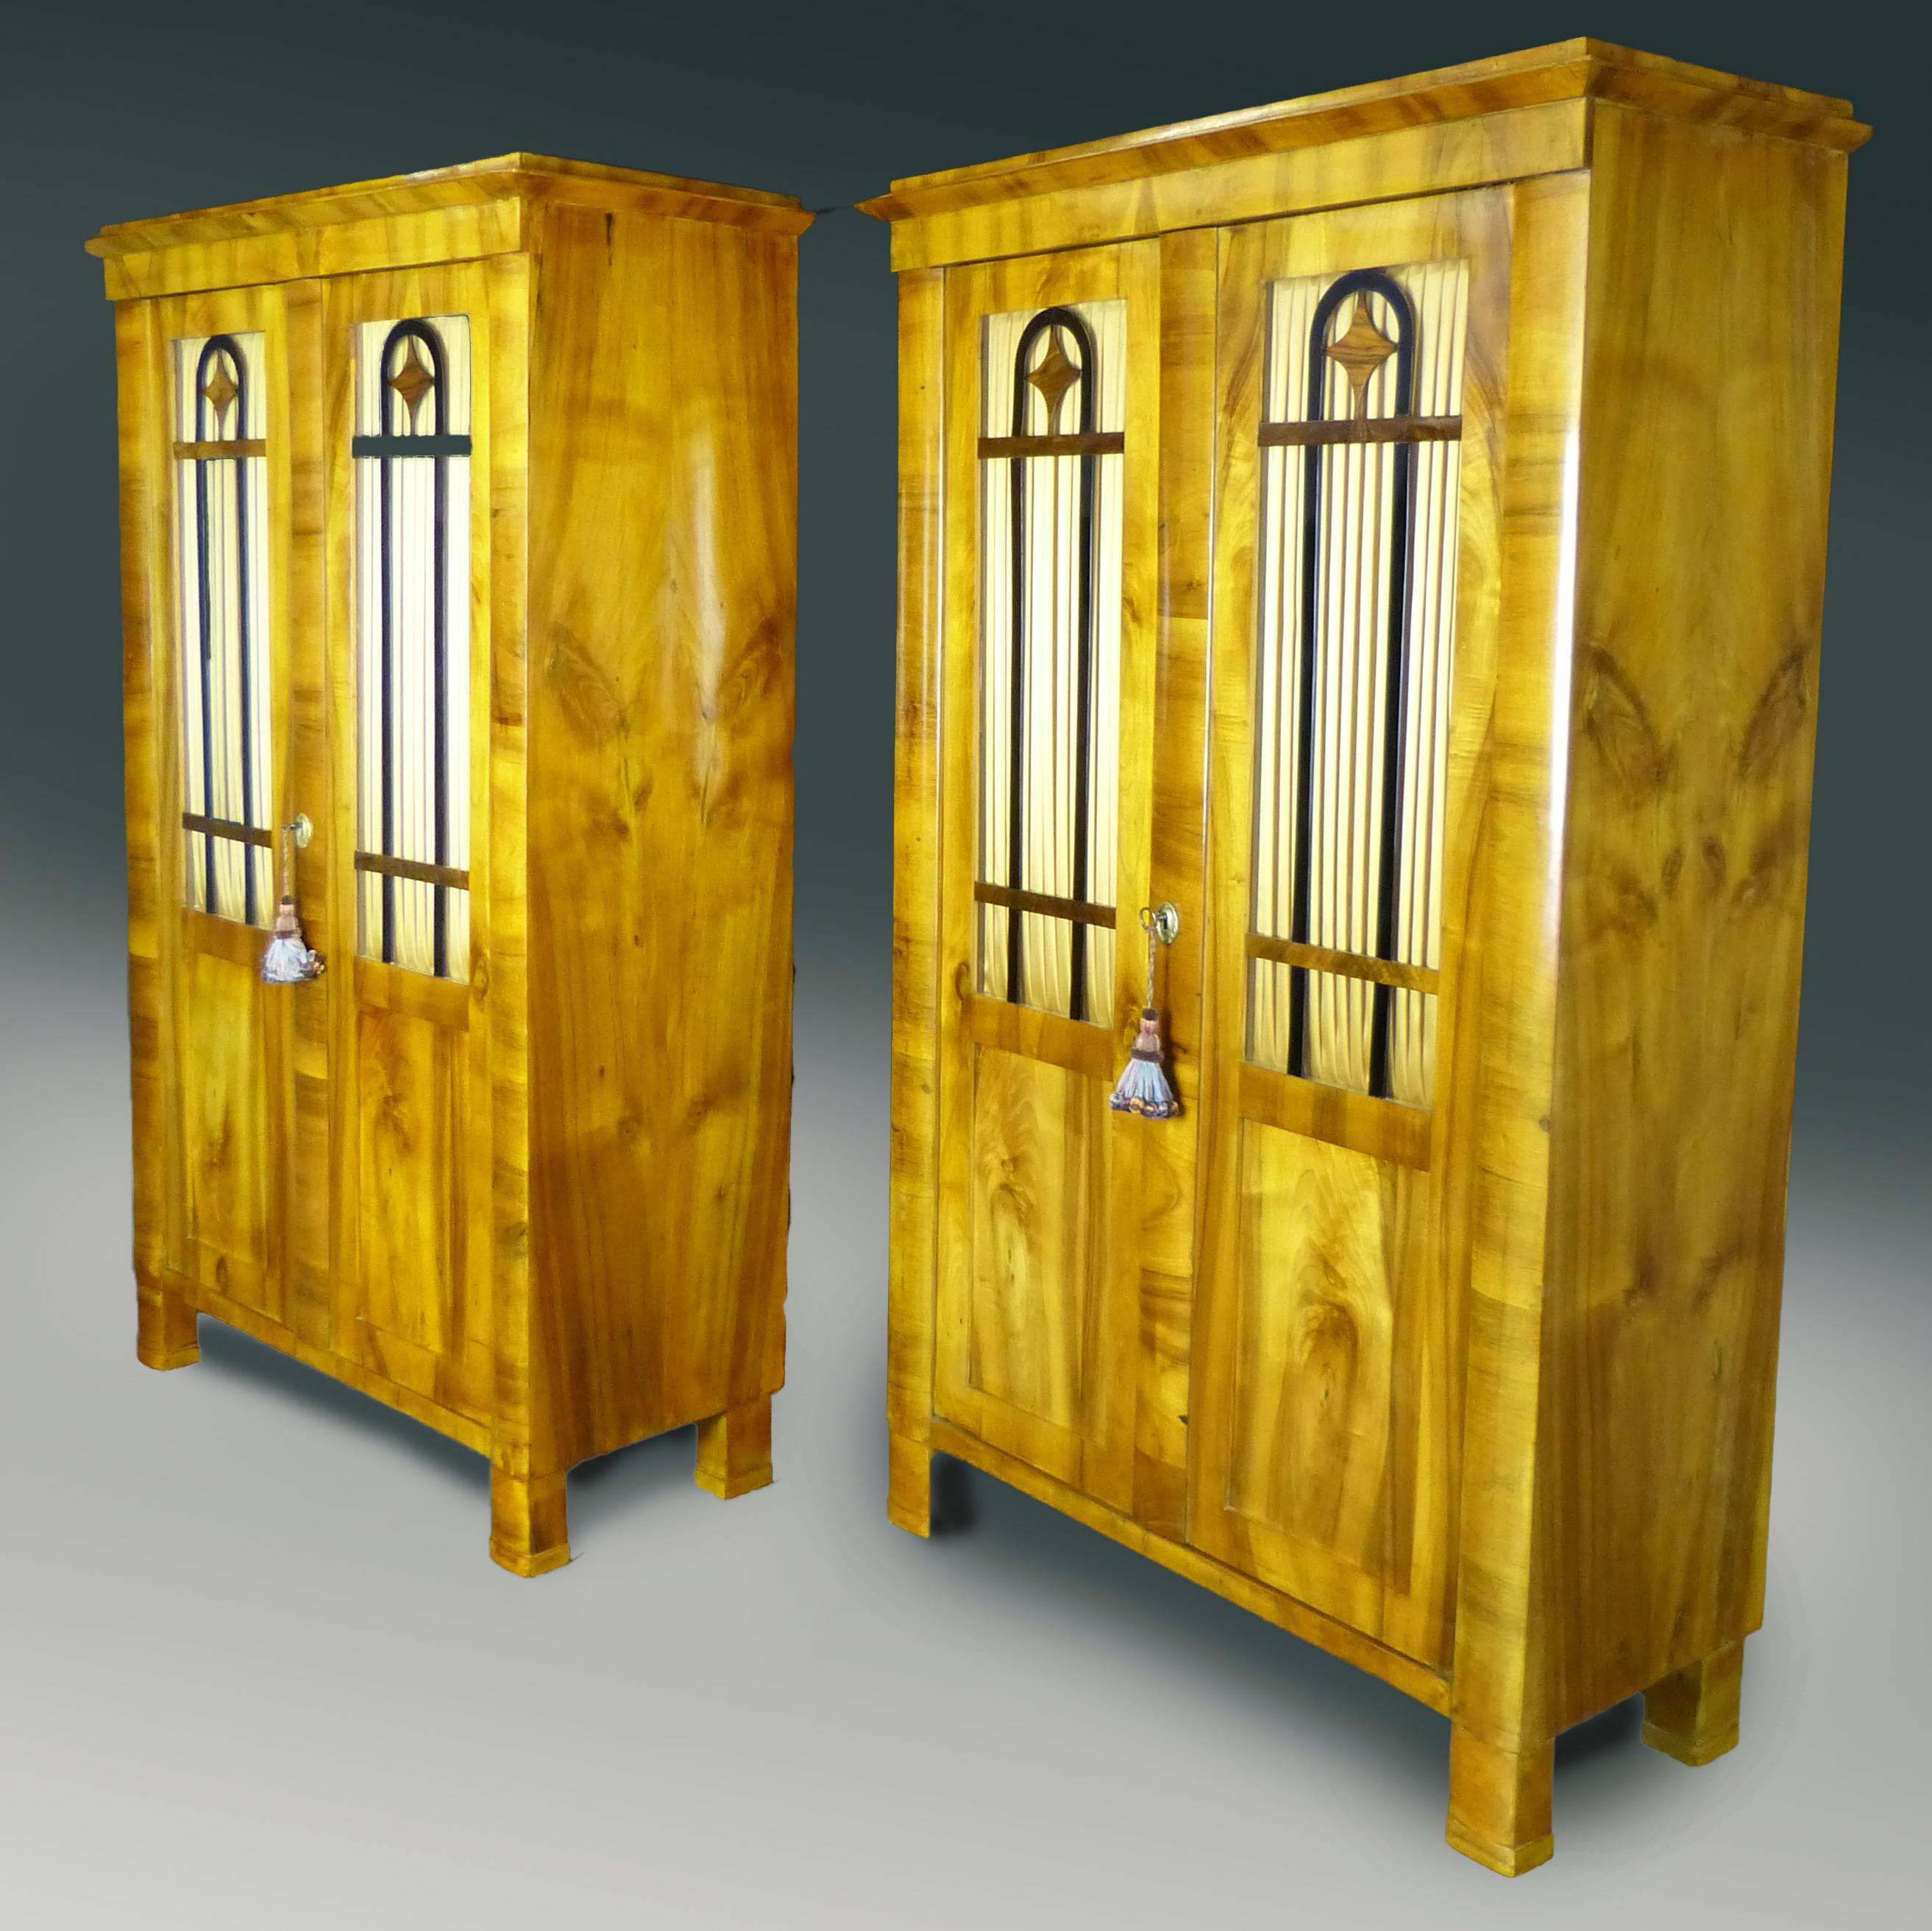 Outstanding and rare pair of period Biedermeier display cabinets / Bookcases of finely figured north European blond walnut exterior. Each display cabinet features three slightly curved frontal columns, two of them terminating below in block feet of